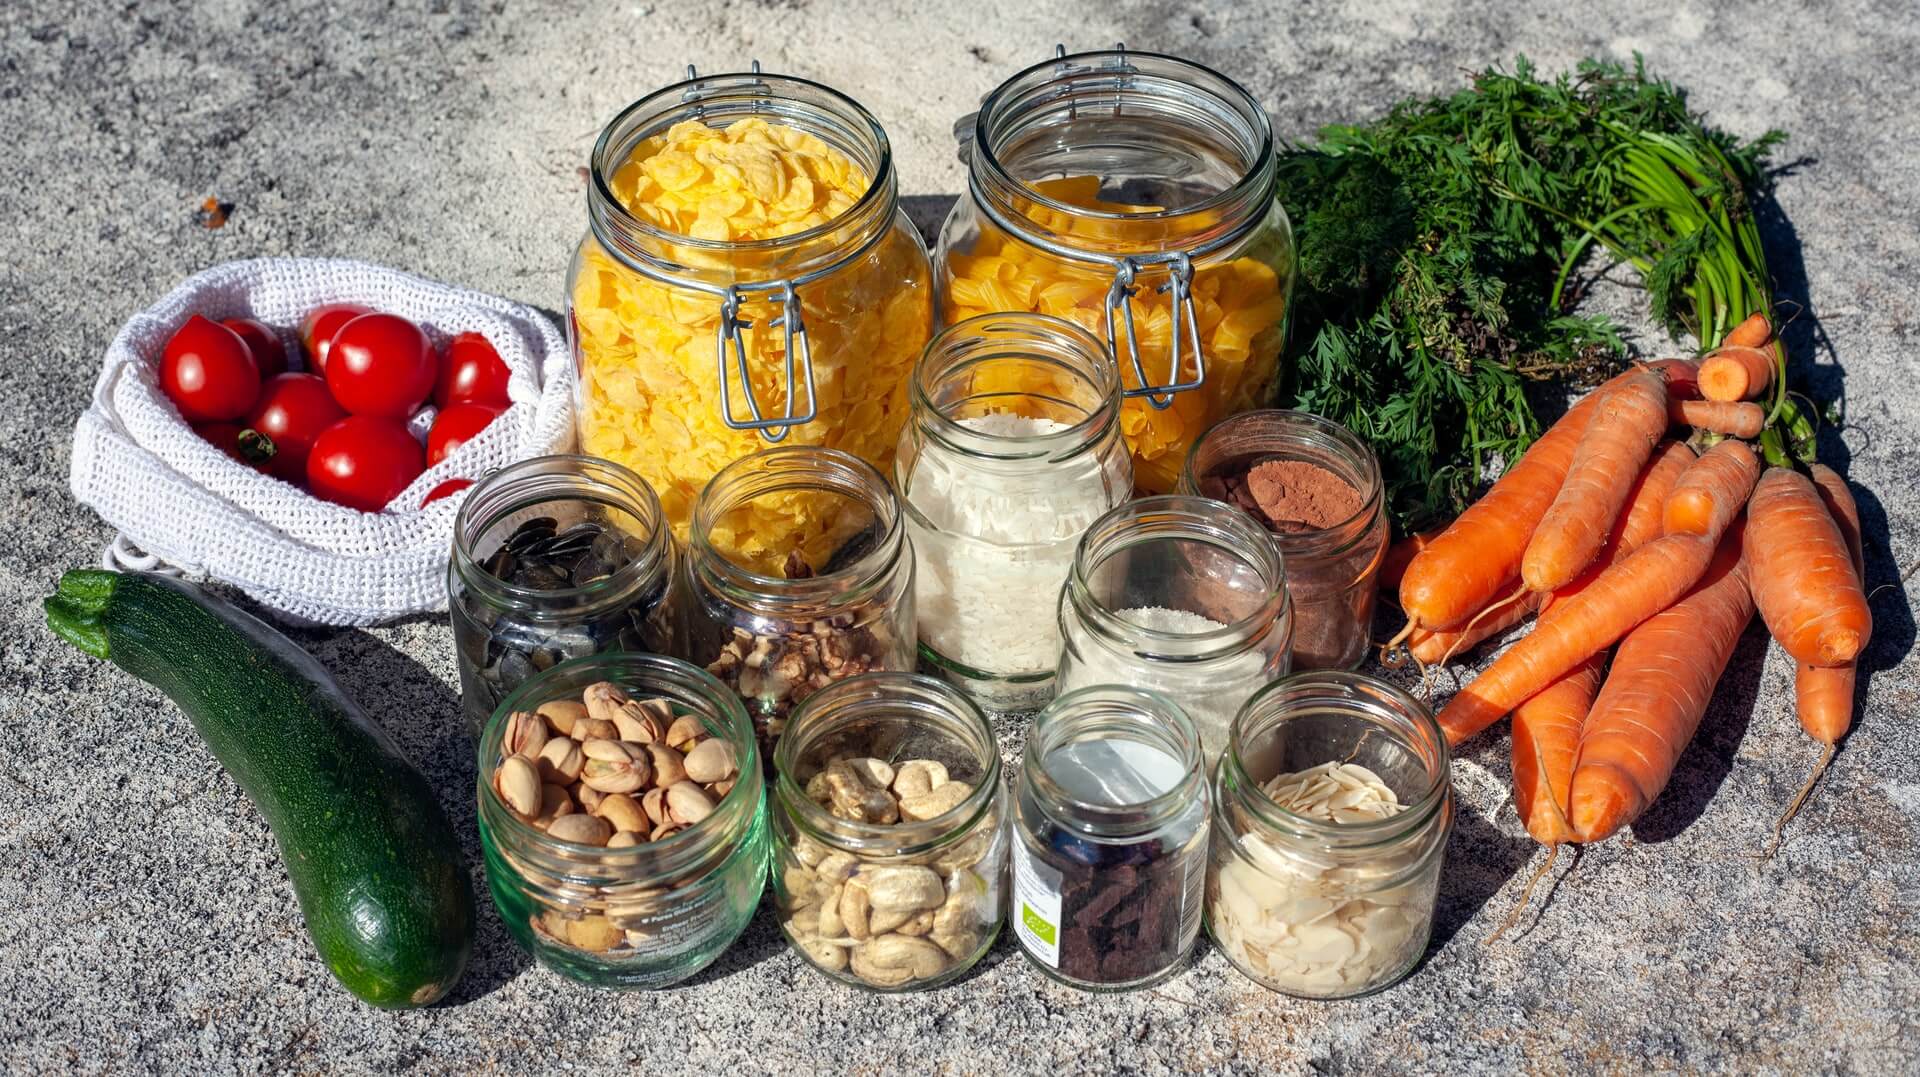 https://yera.com/wp-content/uploads/2022/07/Food-Storage-Guide-Using-Glass-Jars-and-Containers.jpg